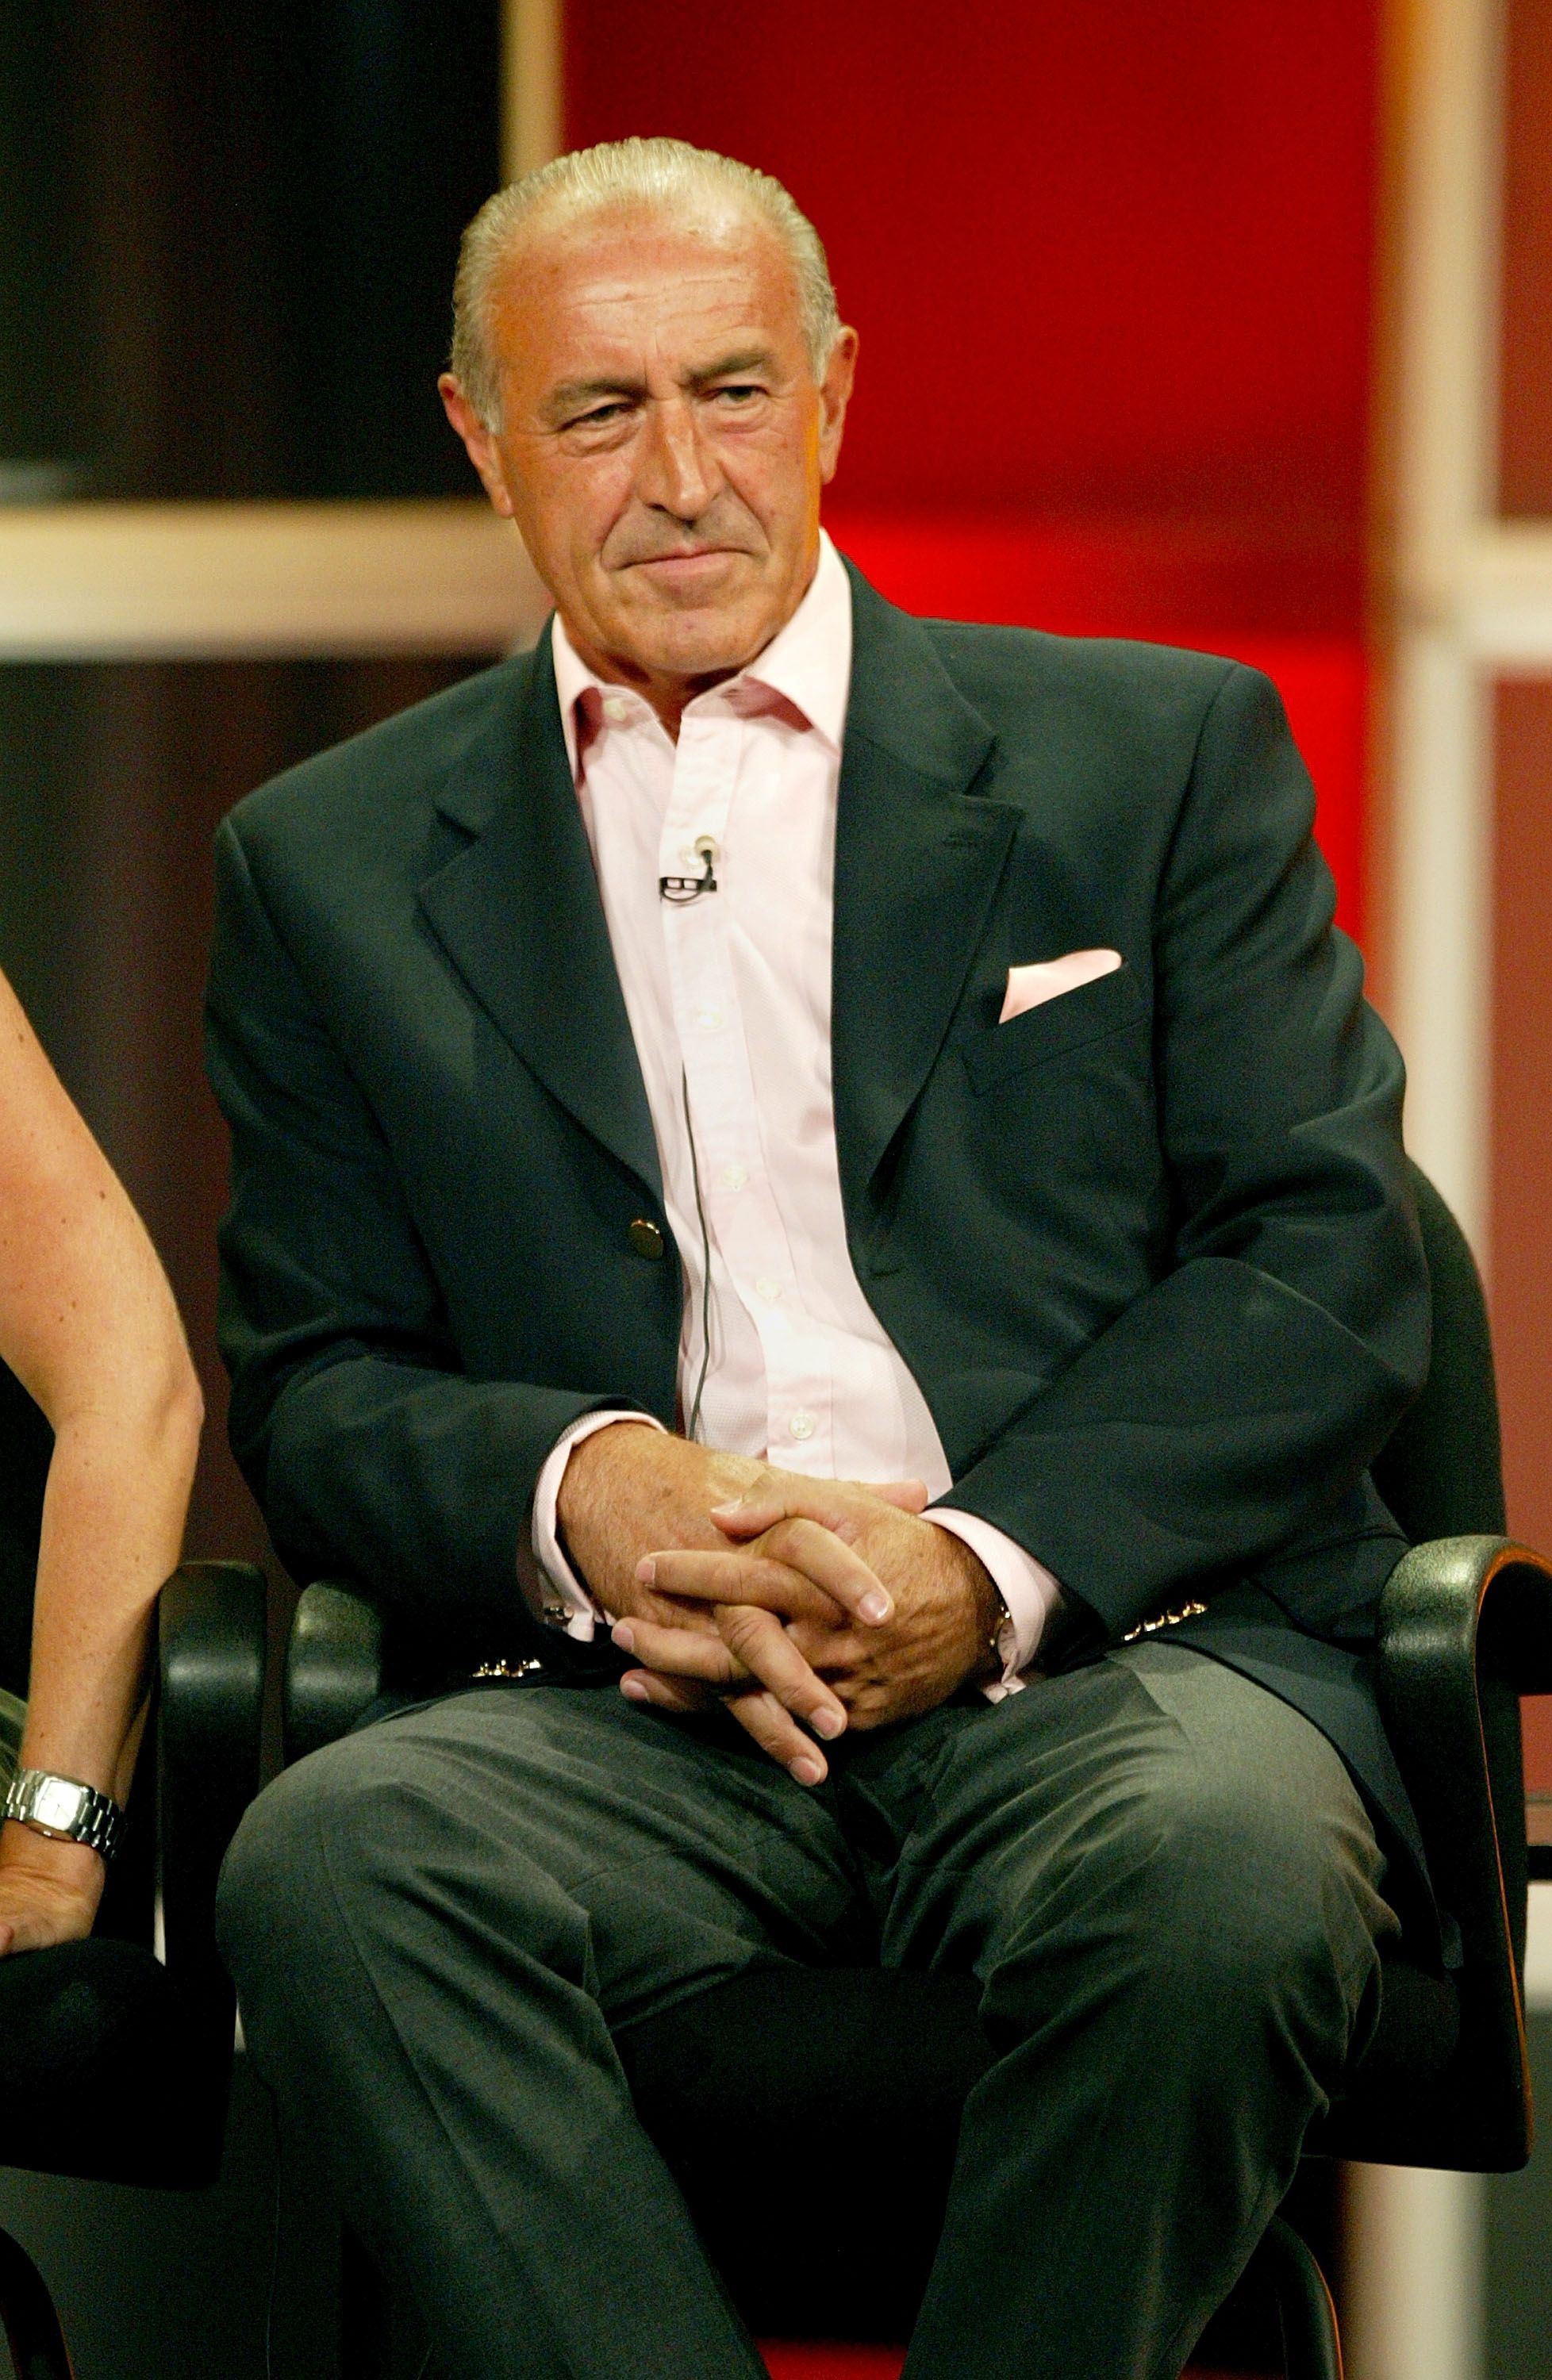 Len Goodman at the panel discussion for "Dancing with the Stars" during the ABC 2005 Television Critics Association Summer Press Tour at the Beverly Hilton Hotel on July 26, 2005 in Beverly Hills, California | Photo: Getty Images 